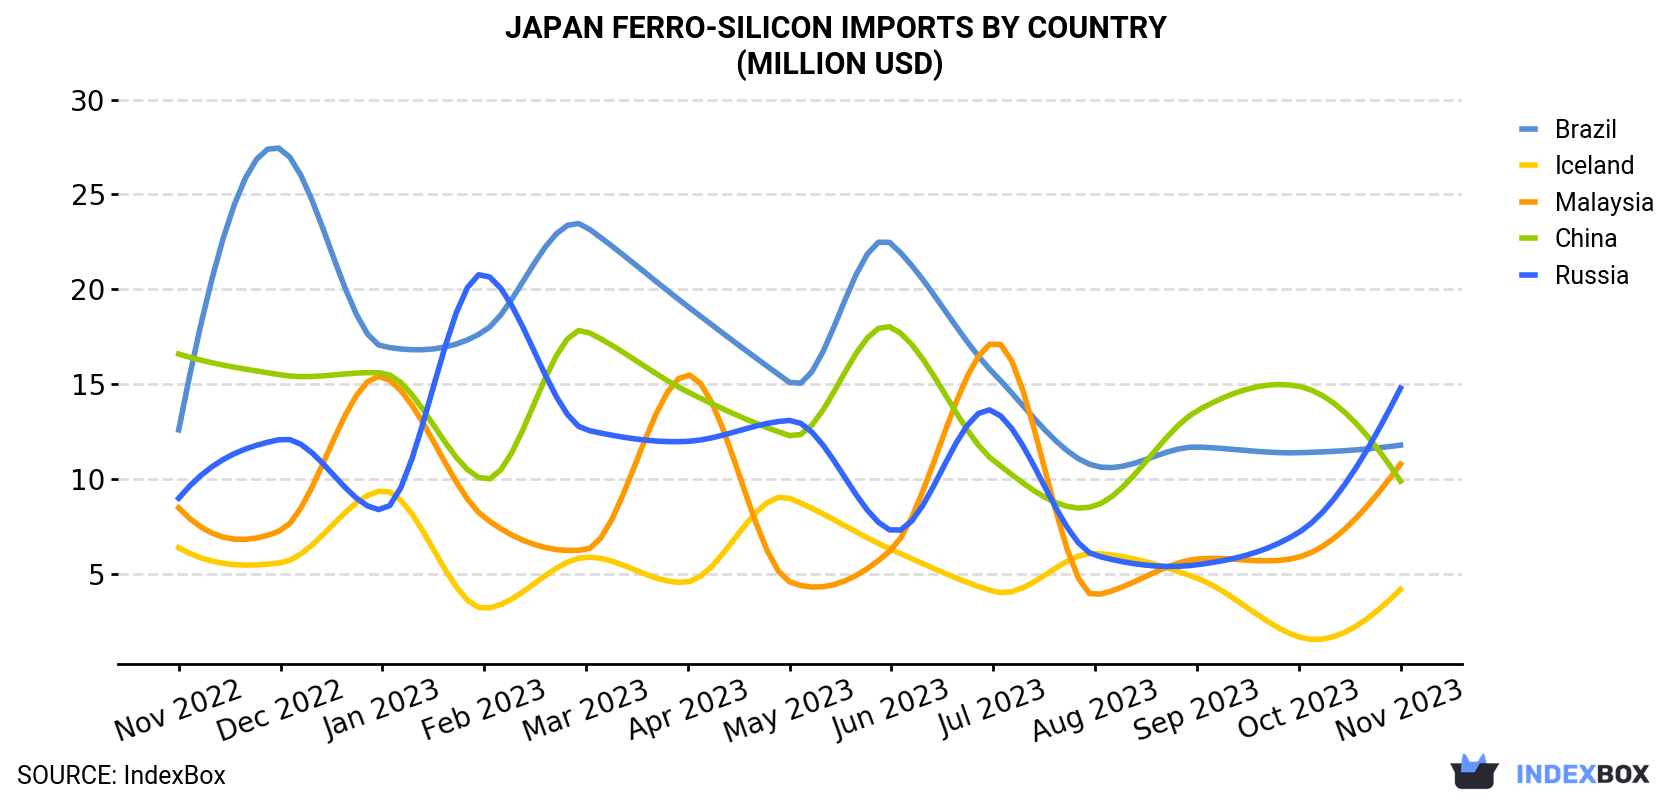 Japan Ferro-Silicon Imports By Country (Million USD)